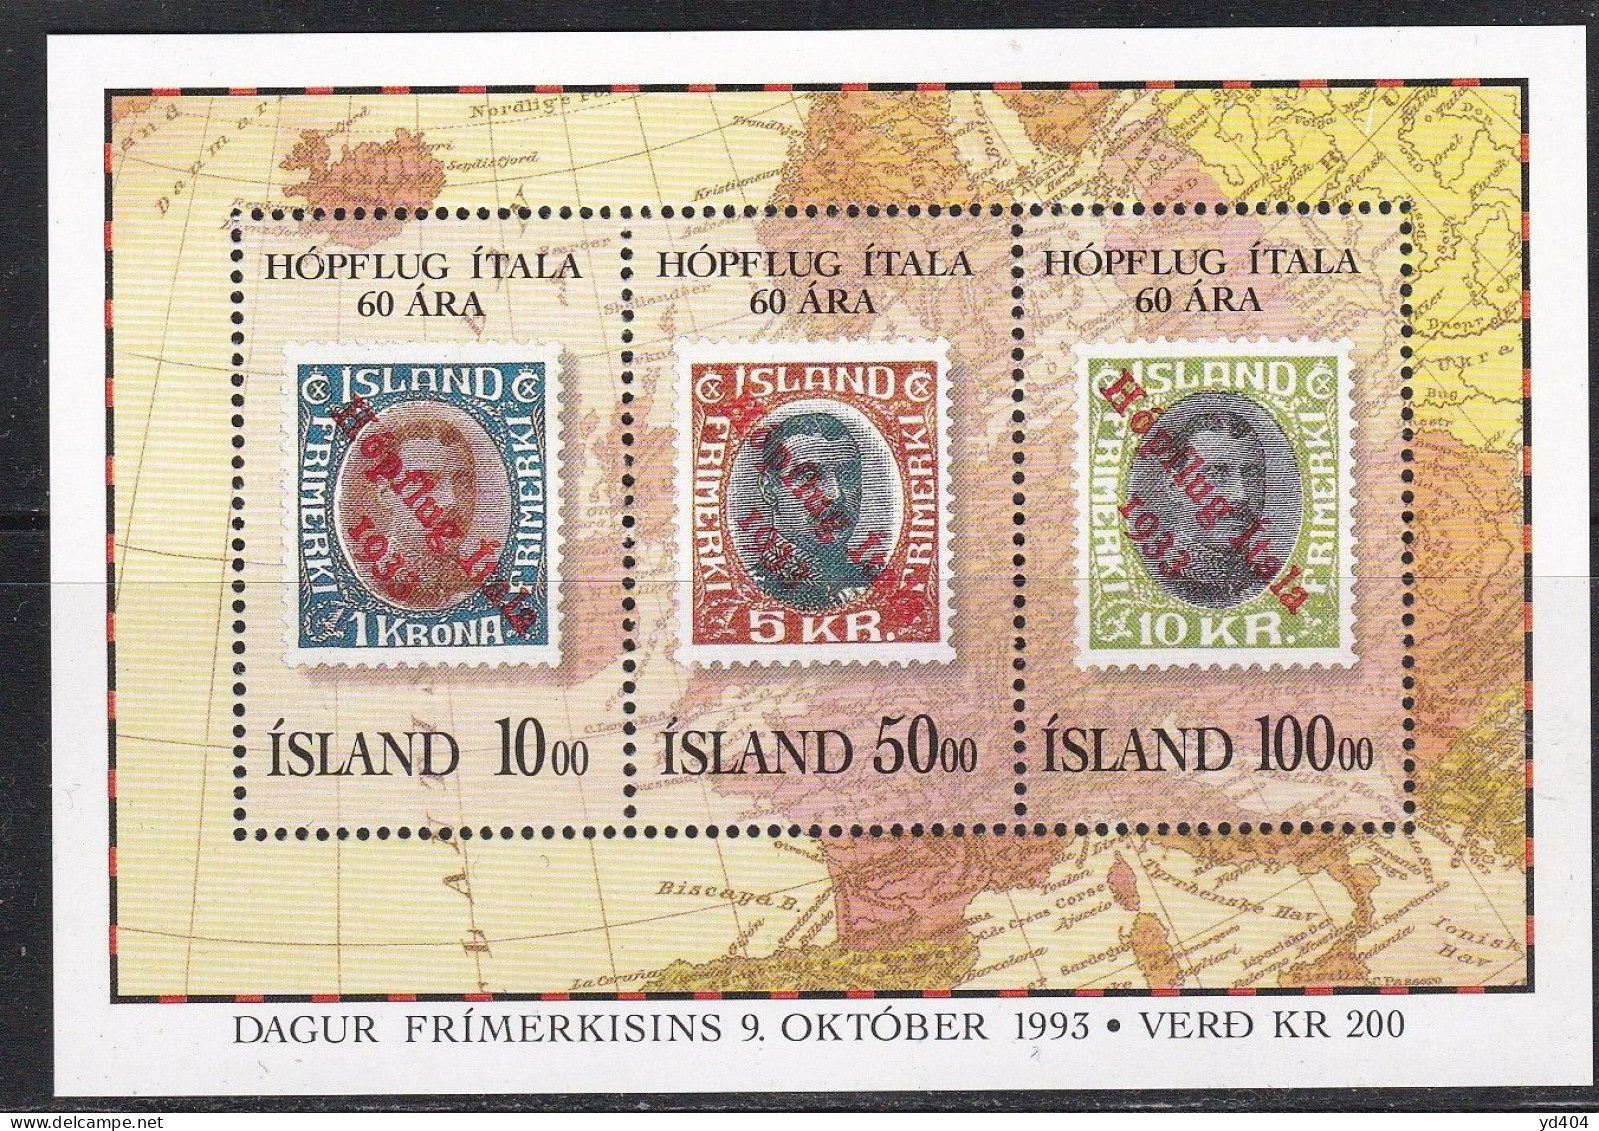 IS482 – ISLANDE – ICELAND – 1993 – JOURNEE DU TIMBRE – SG # MS 810 MNH 12,25 € - Hojas Y Bloques